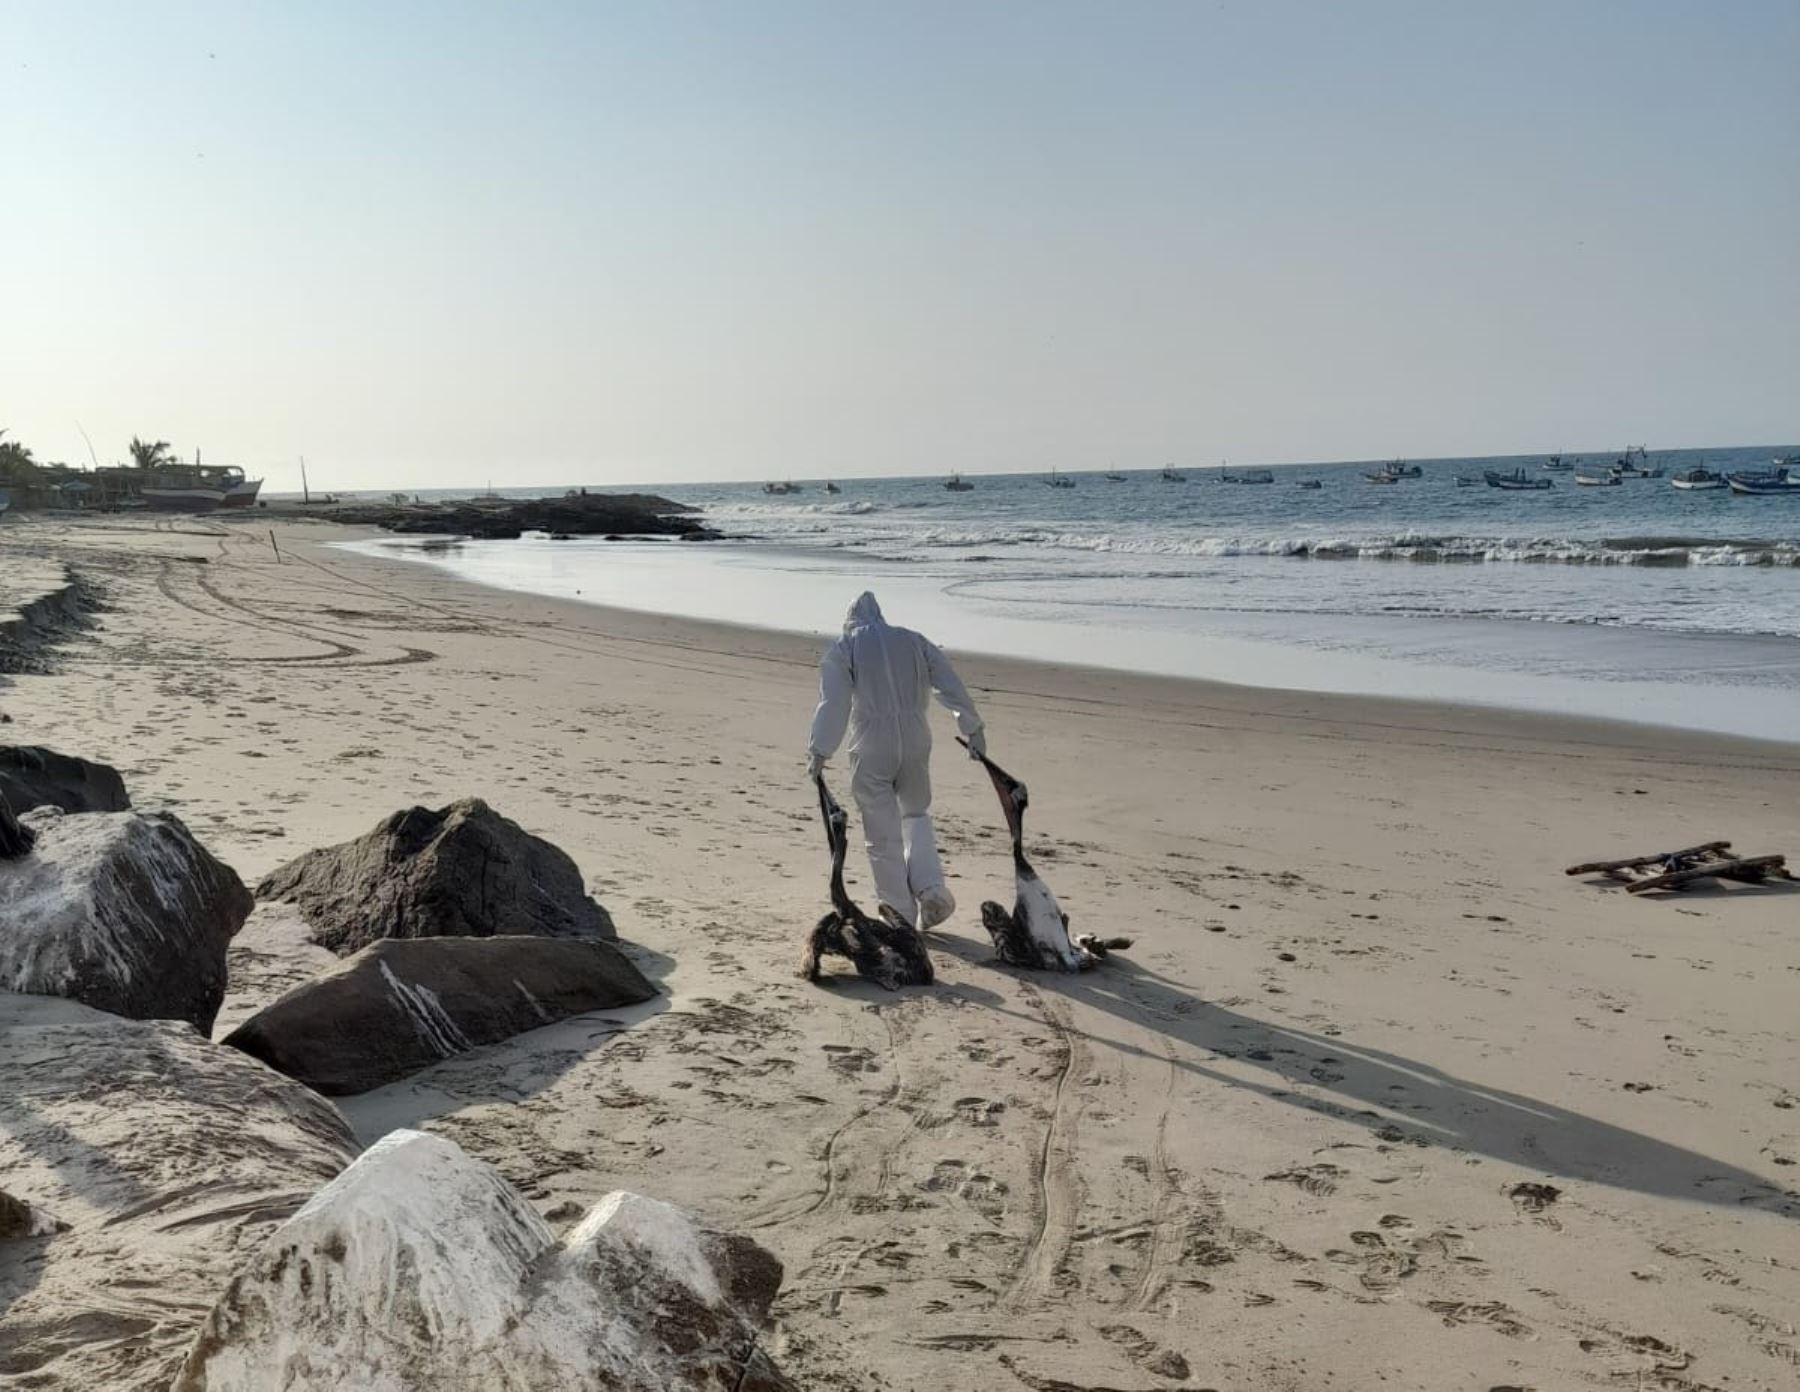 Bird flu in Peru: Municipalities will limit access to beaches to avoid human infection